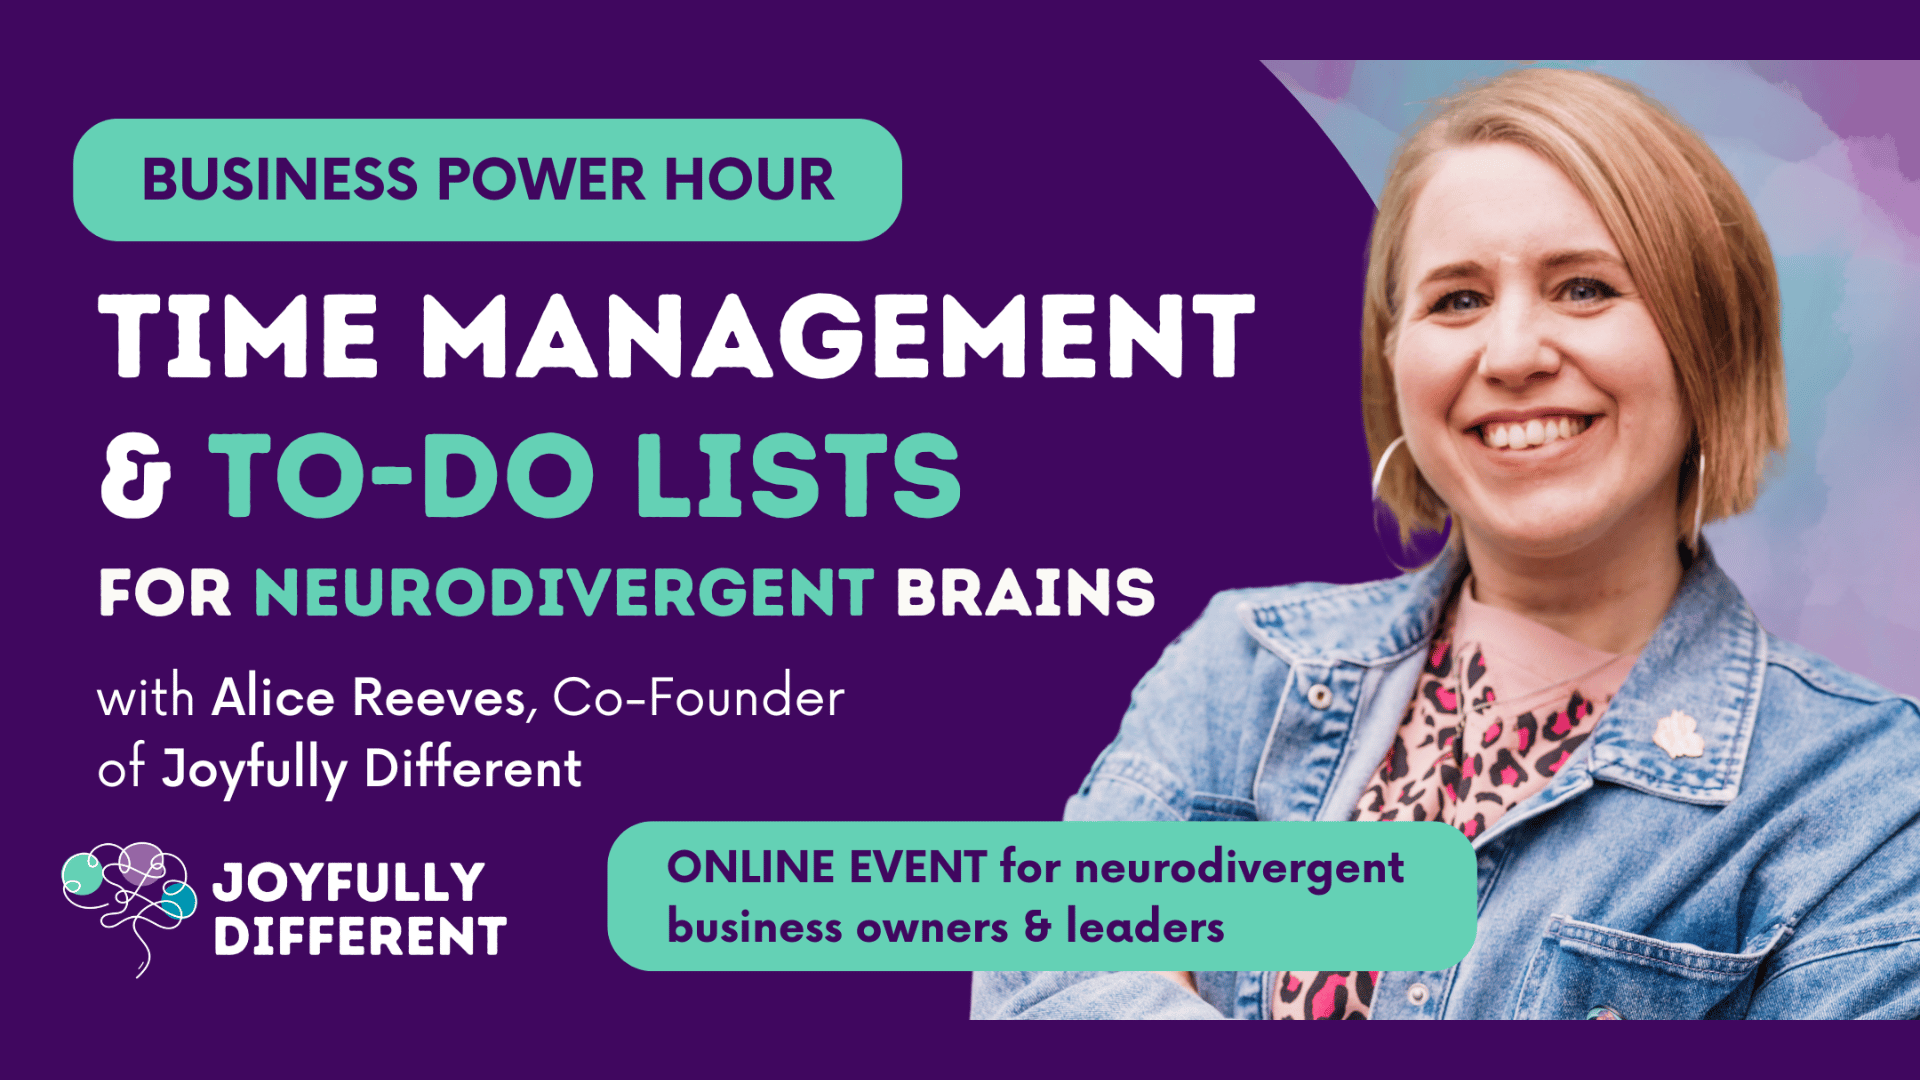 Power Hour: Time Management & To-Do Lists for Neurodivergent Brains